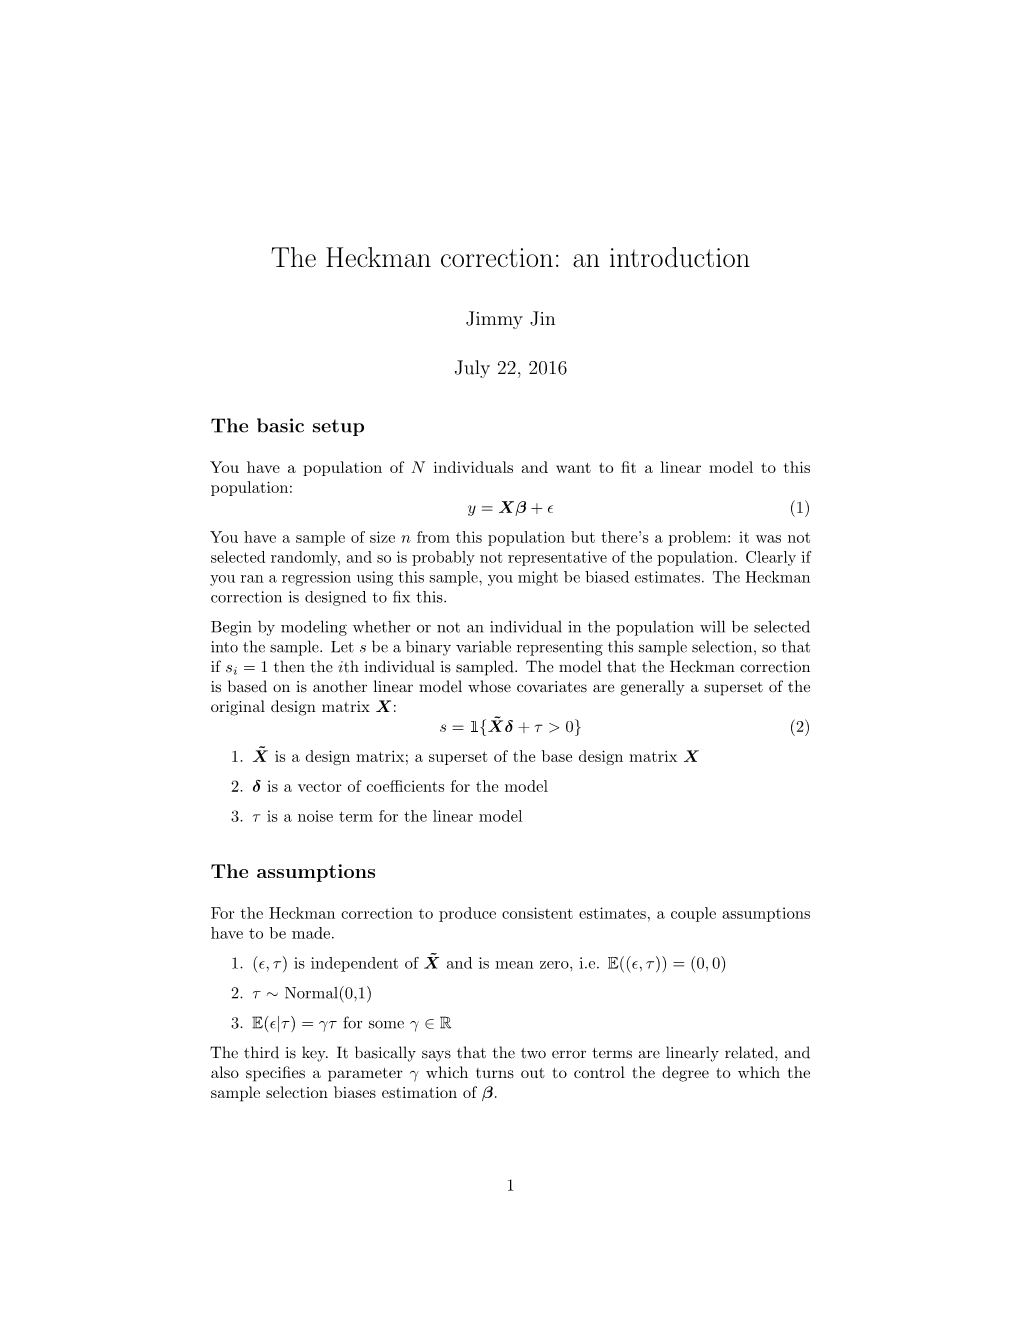 The Heckman Correction: an Introduction